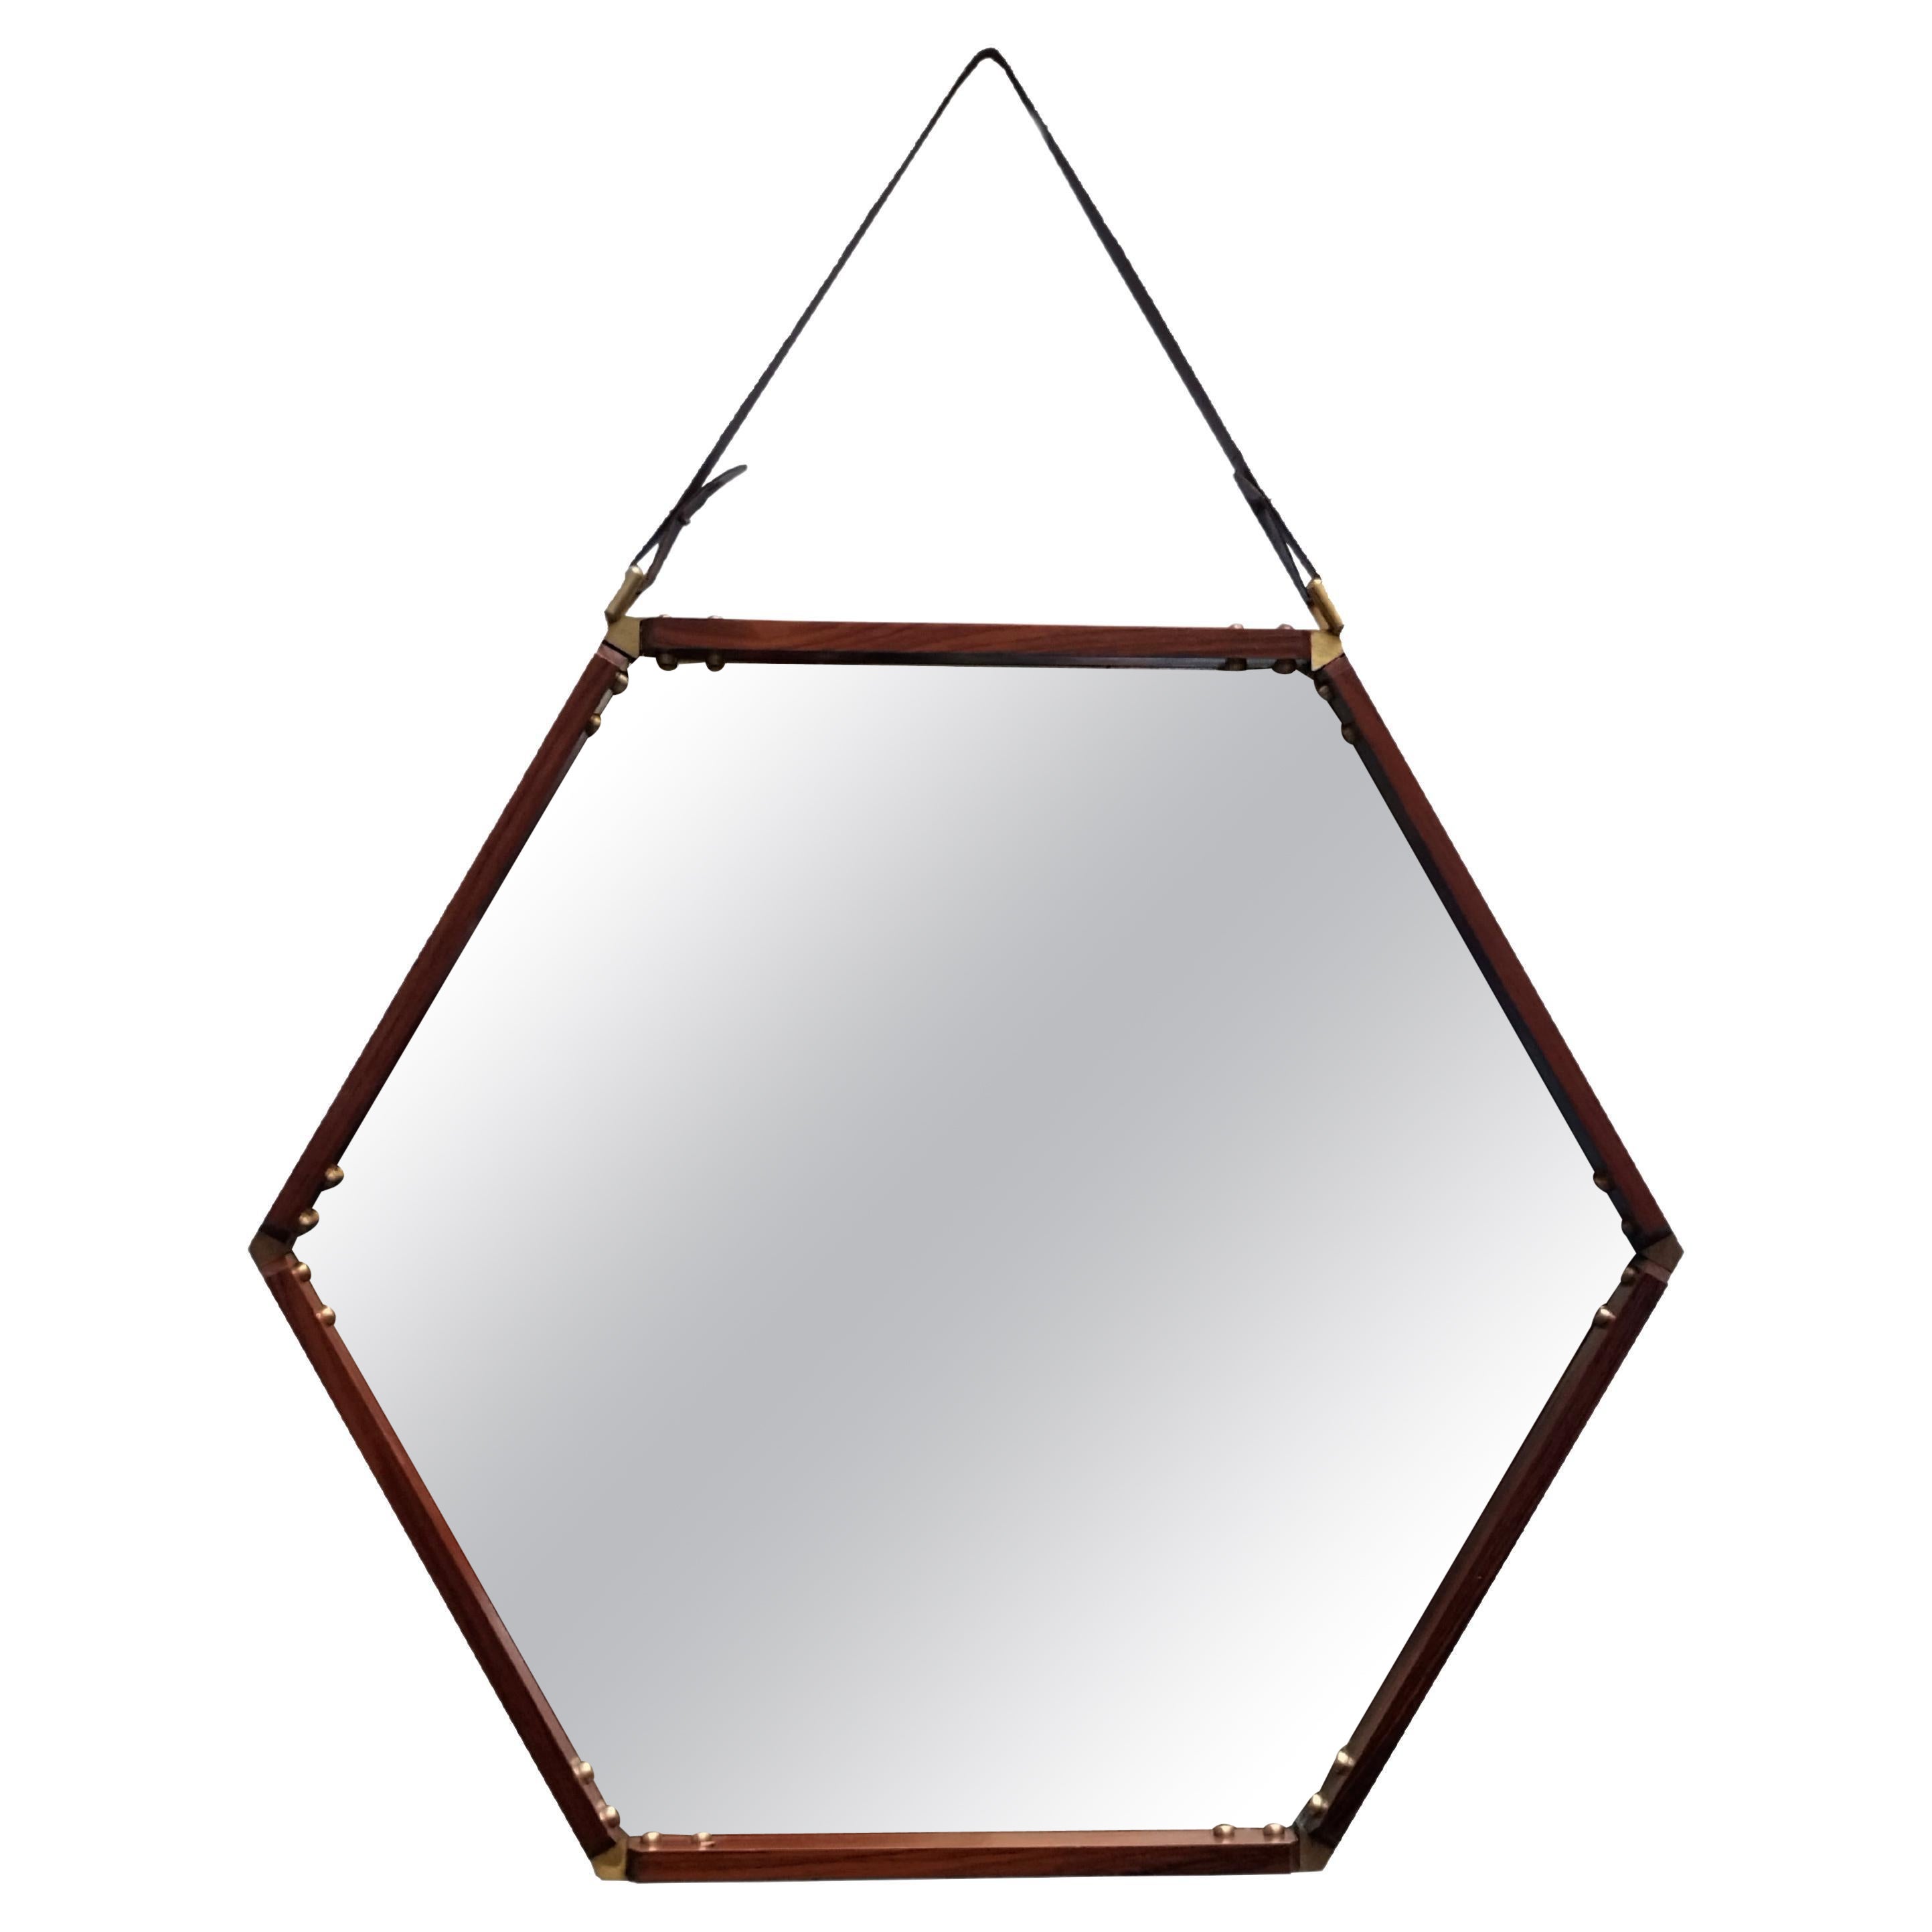 Hexagonal Wall Mirror in Wood, Leather and Brass Details, Italy 1960s